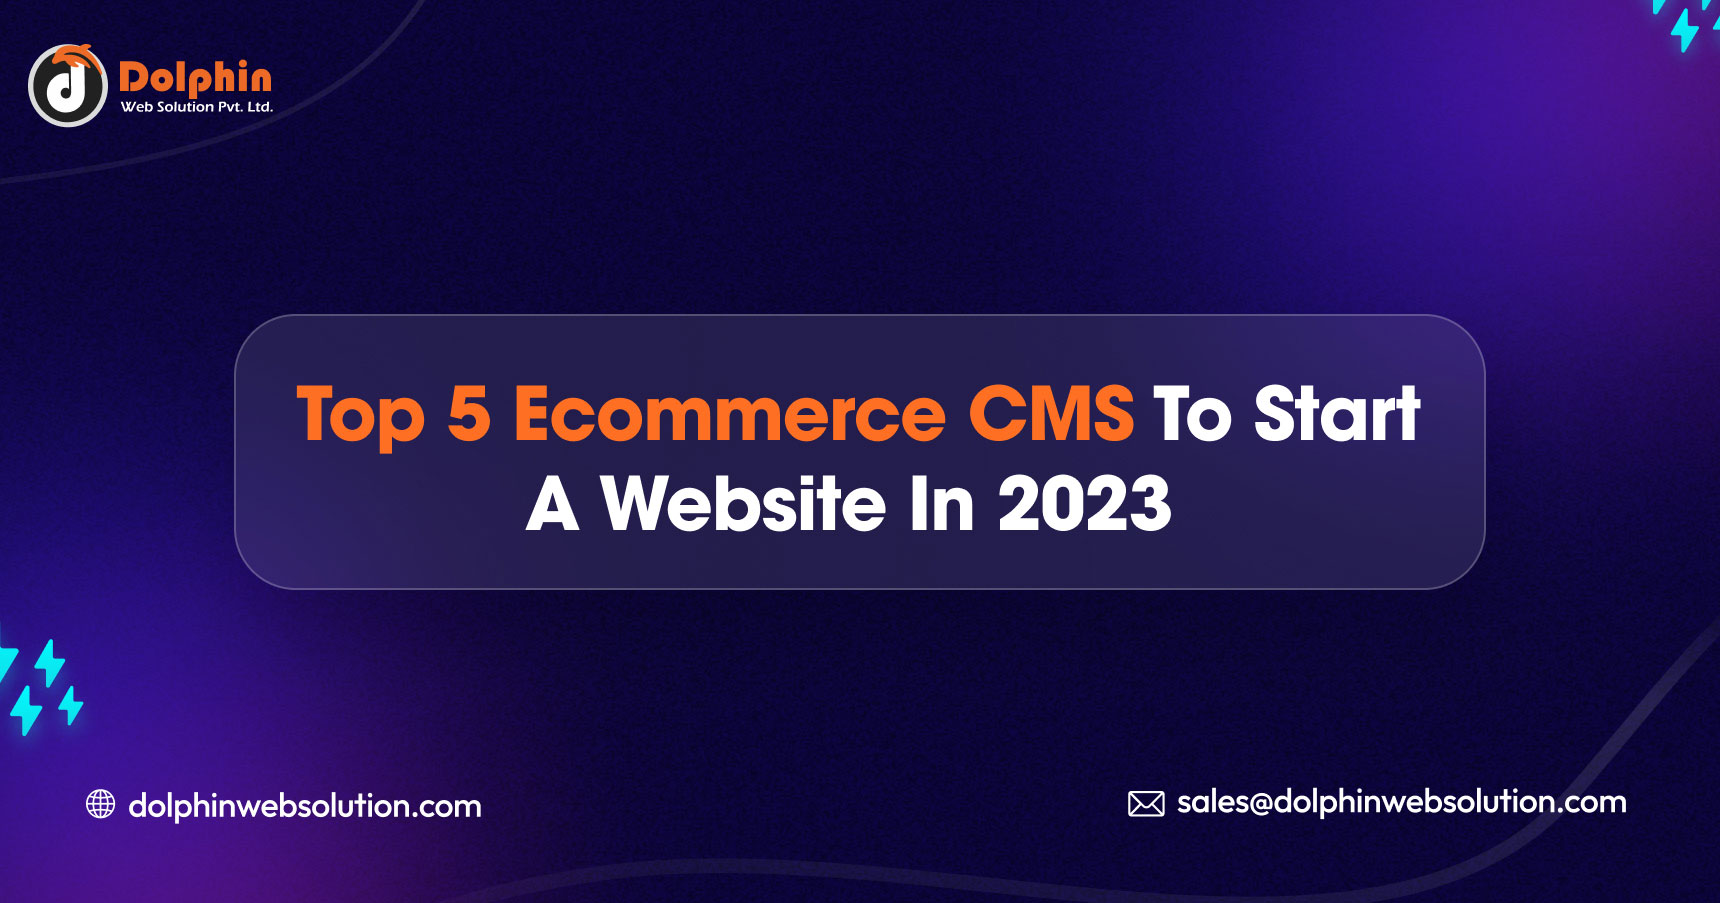 Top 5 Ecommerce CMS to Start a Website